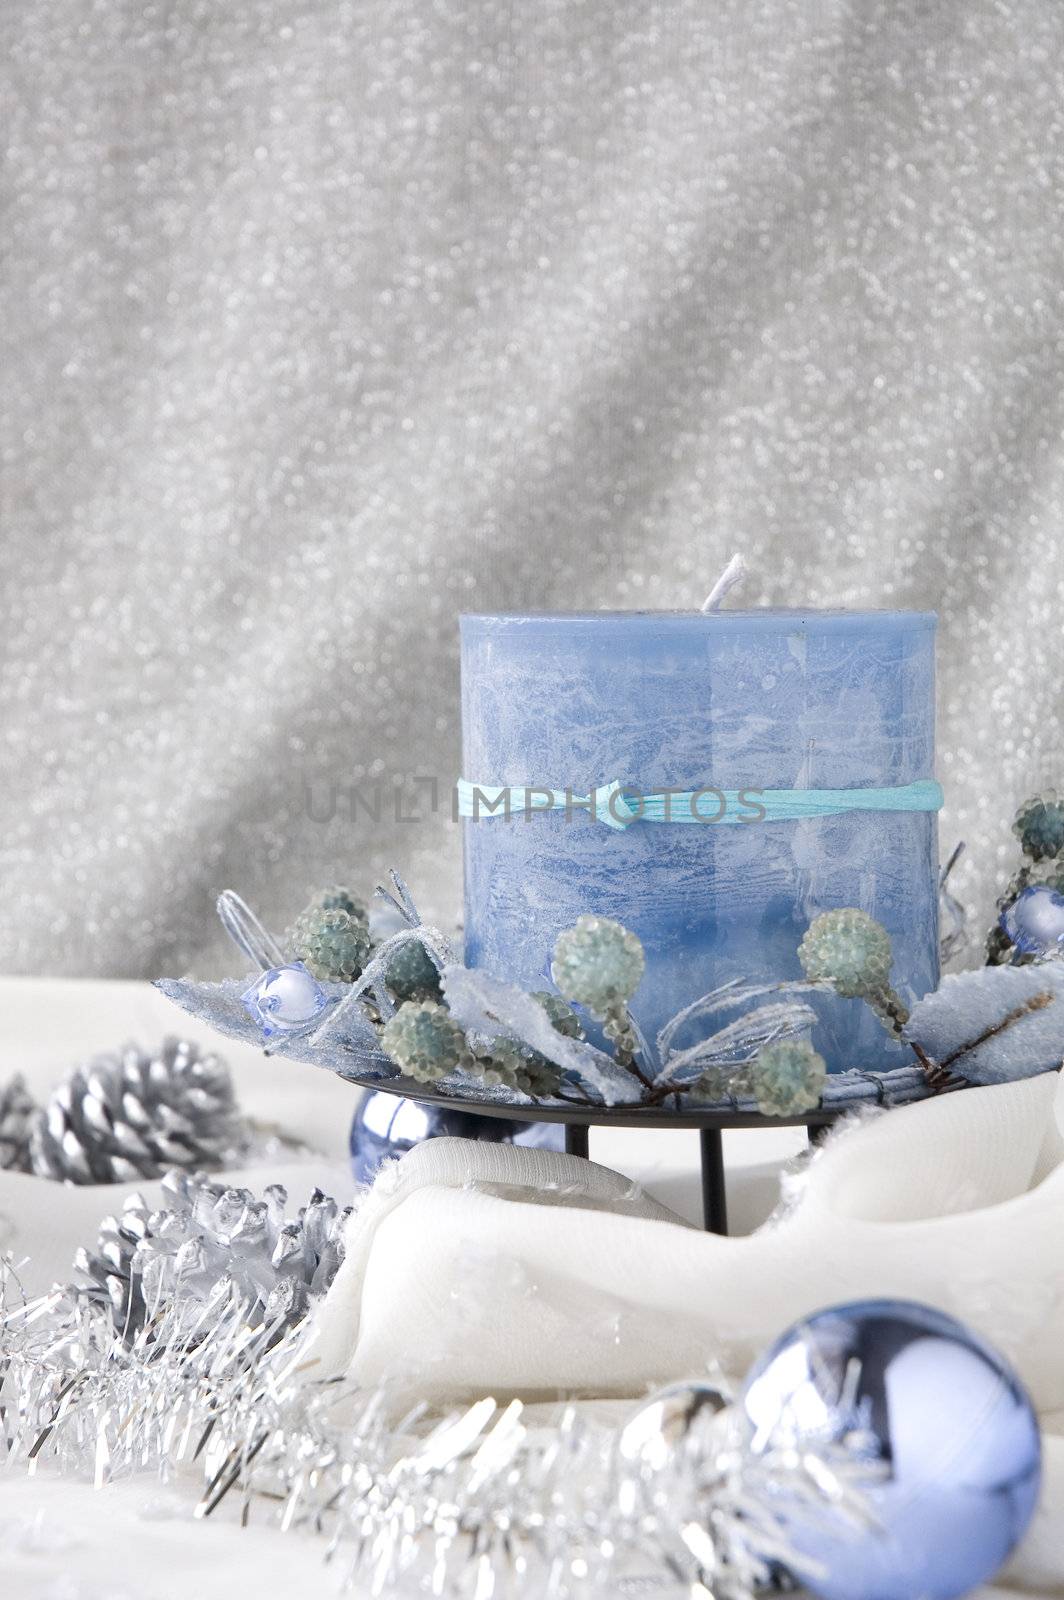 blue candle in winter moment decorated with ornaments